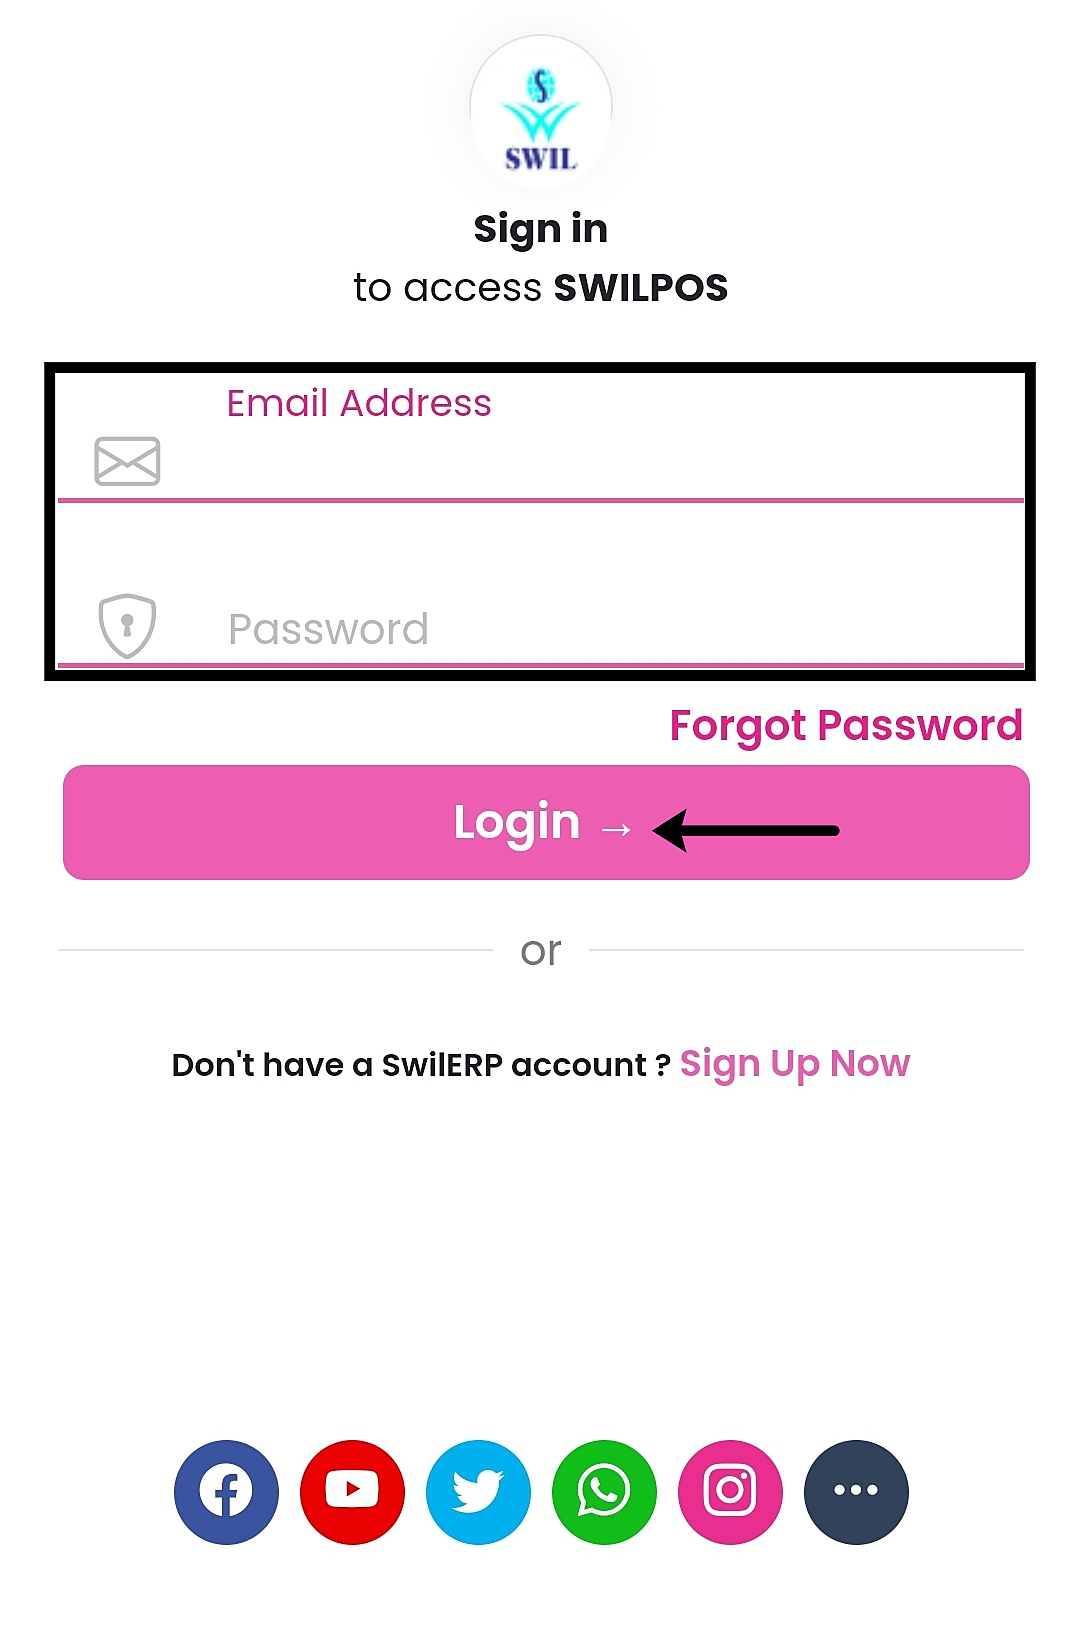 Login screen of SWILPOS mobile app with fields for email address and password, and social media sign-up options.